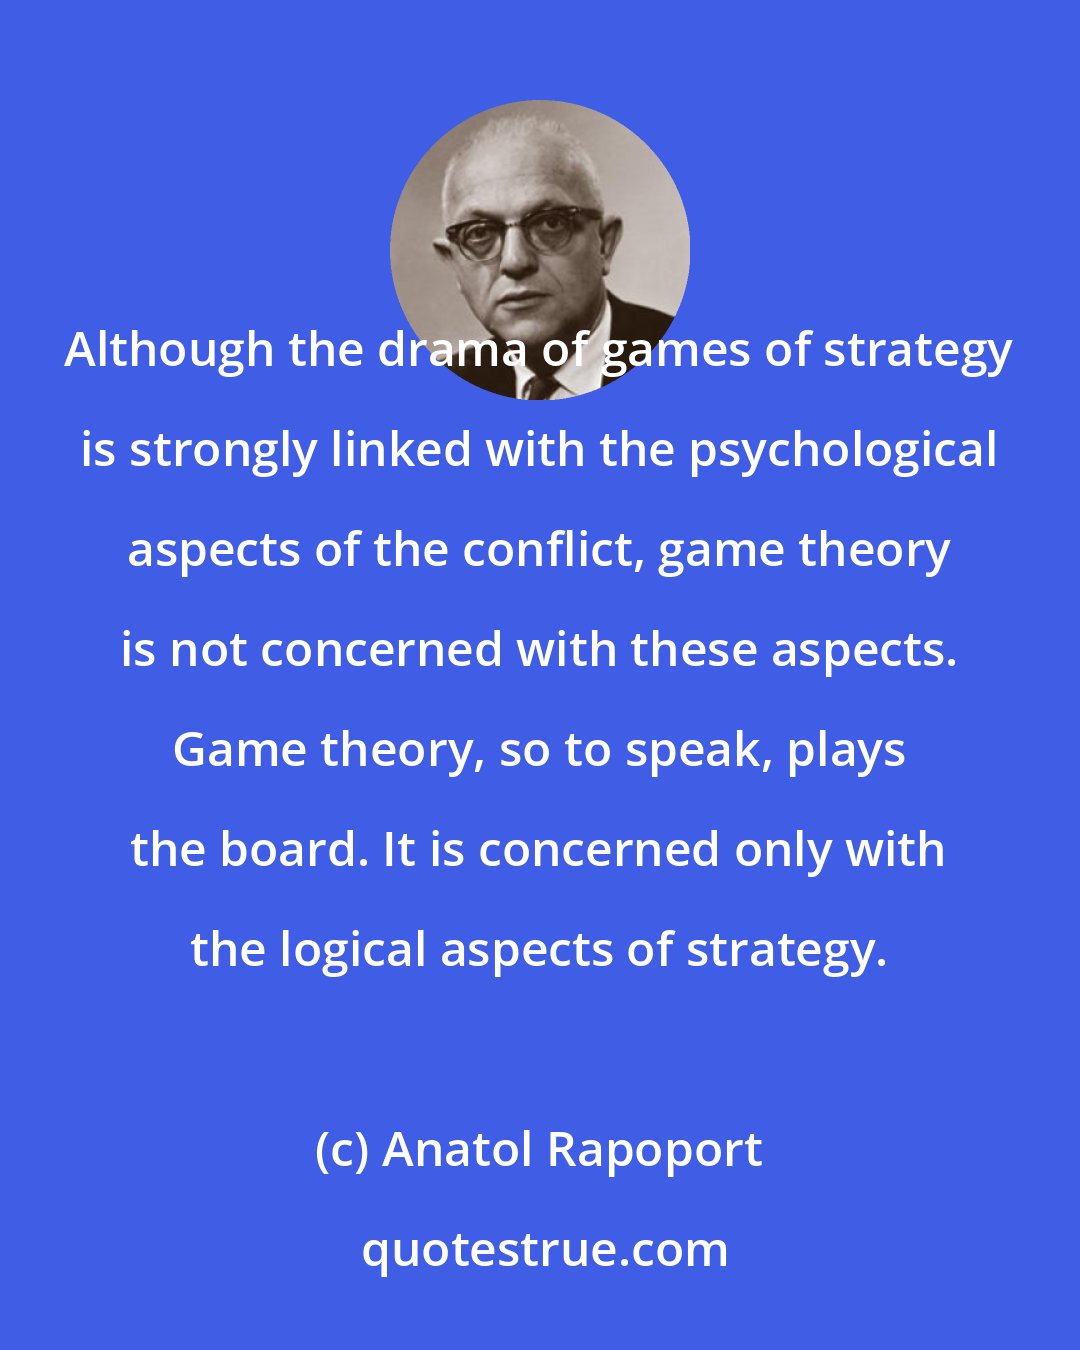 Anatol Rapoport: Although the drama of games of strategy is strongly linked with the psychological aspects of the conflict, game theory is not concerned with these aspects. Game theory, so to speak, plays the board. It is concerned only with the logical aspects of strategy.